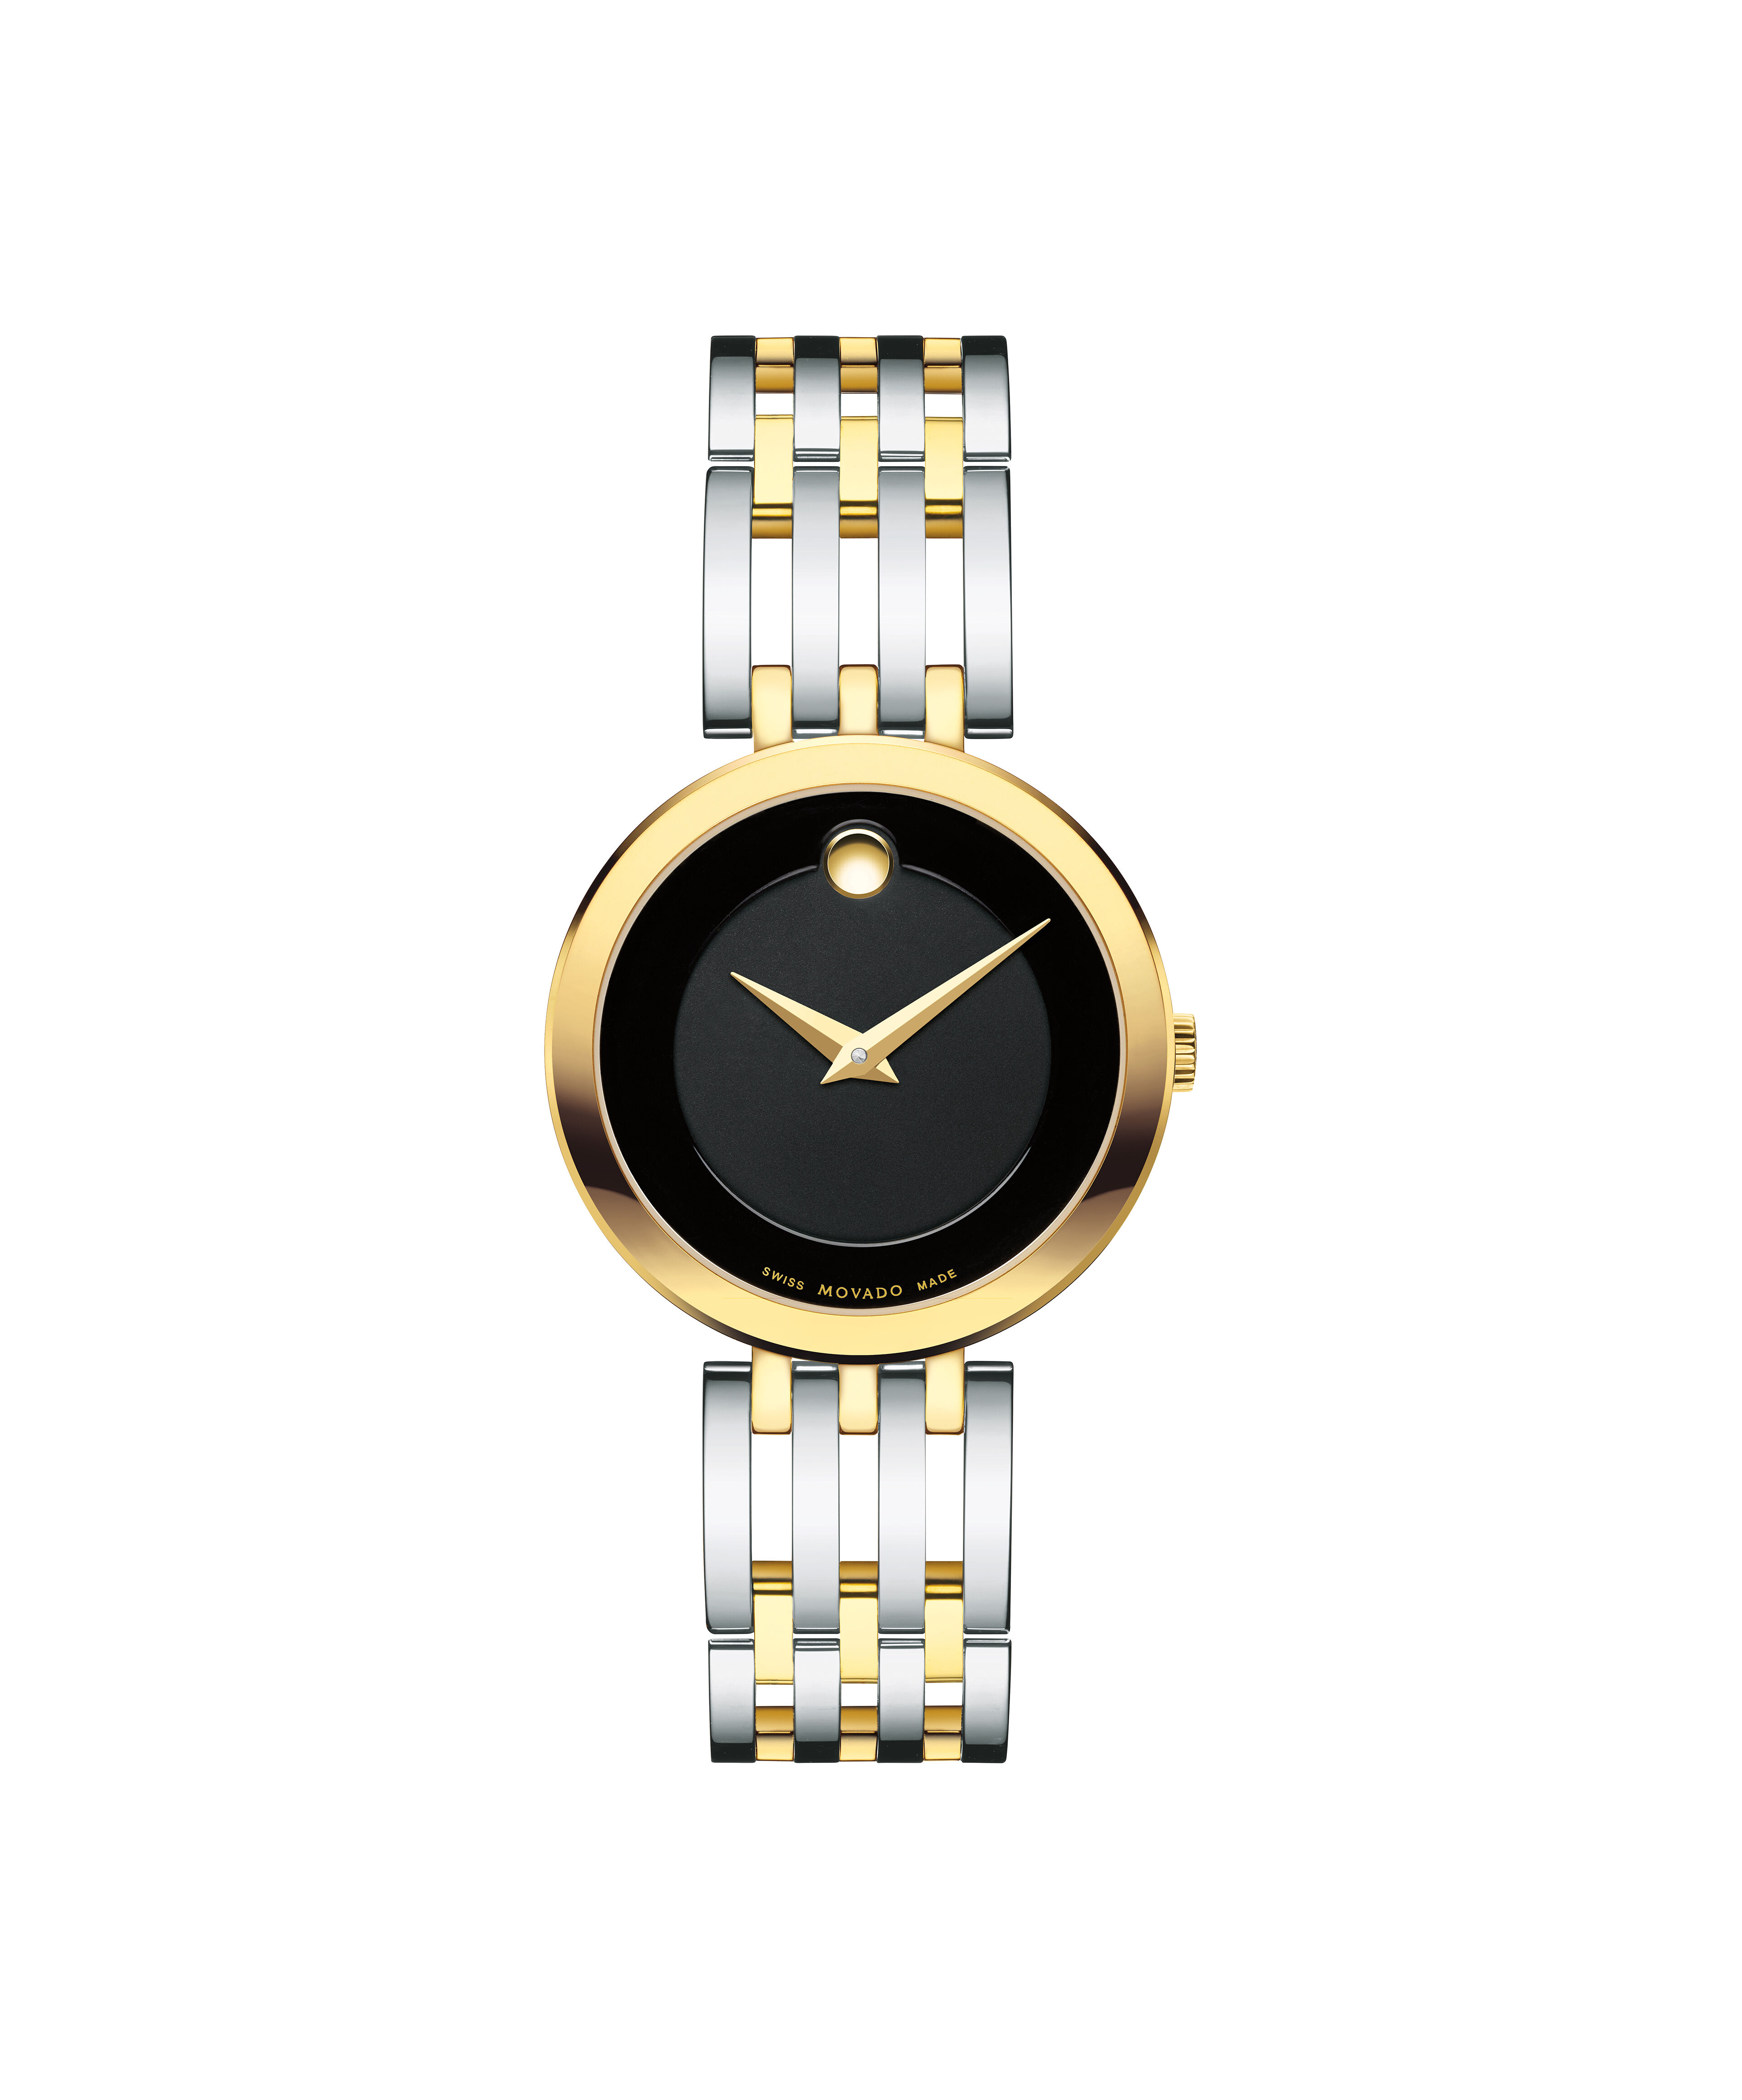 Movado Concerto Gold Diamond Dial Women's Watch 0606791Movado Concerto Ladies, White Mother of Pearl Dial - Steel